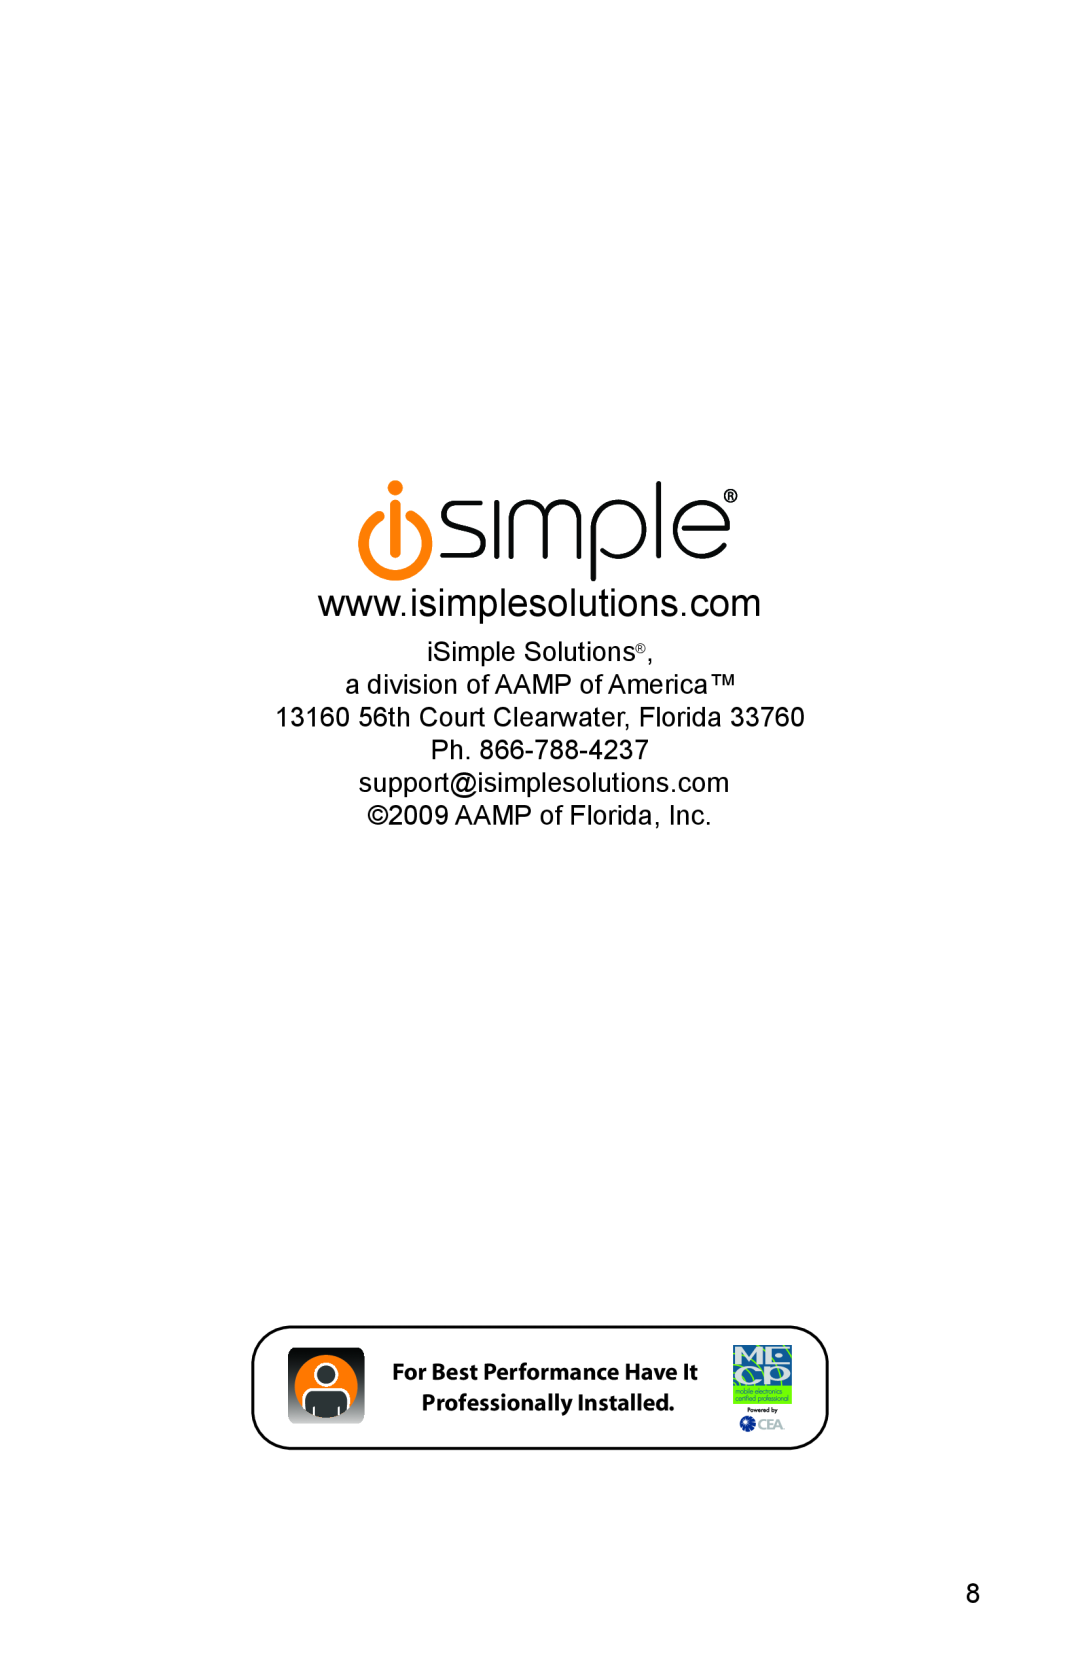 iSimple ISBT21 owner manual iSimple Solutions a division of AAMP of America, 13160 56th Court Clearwater, Florida 